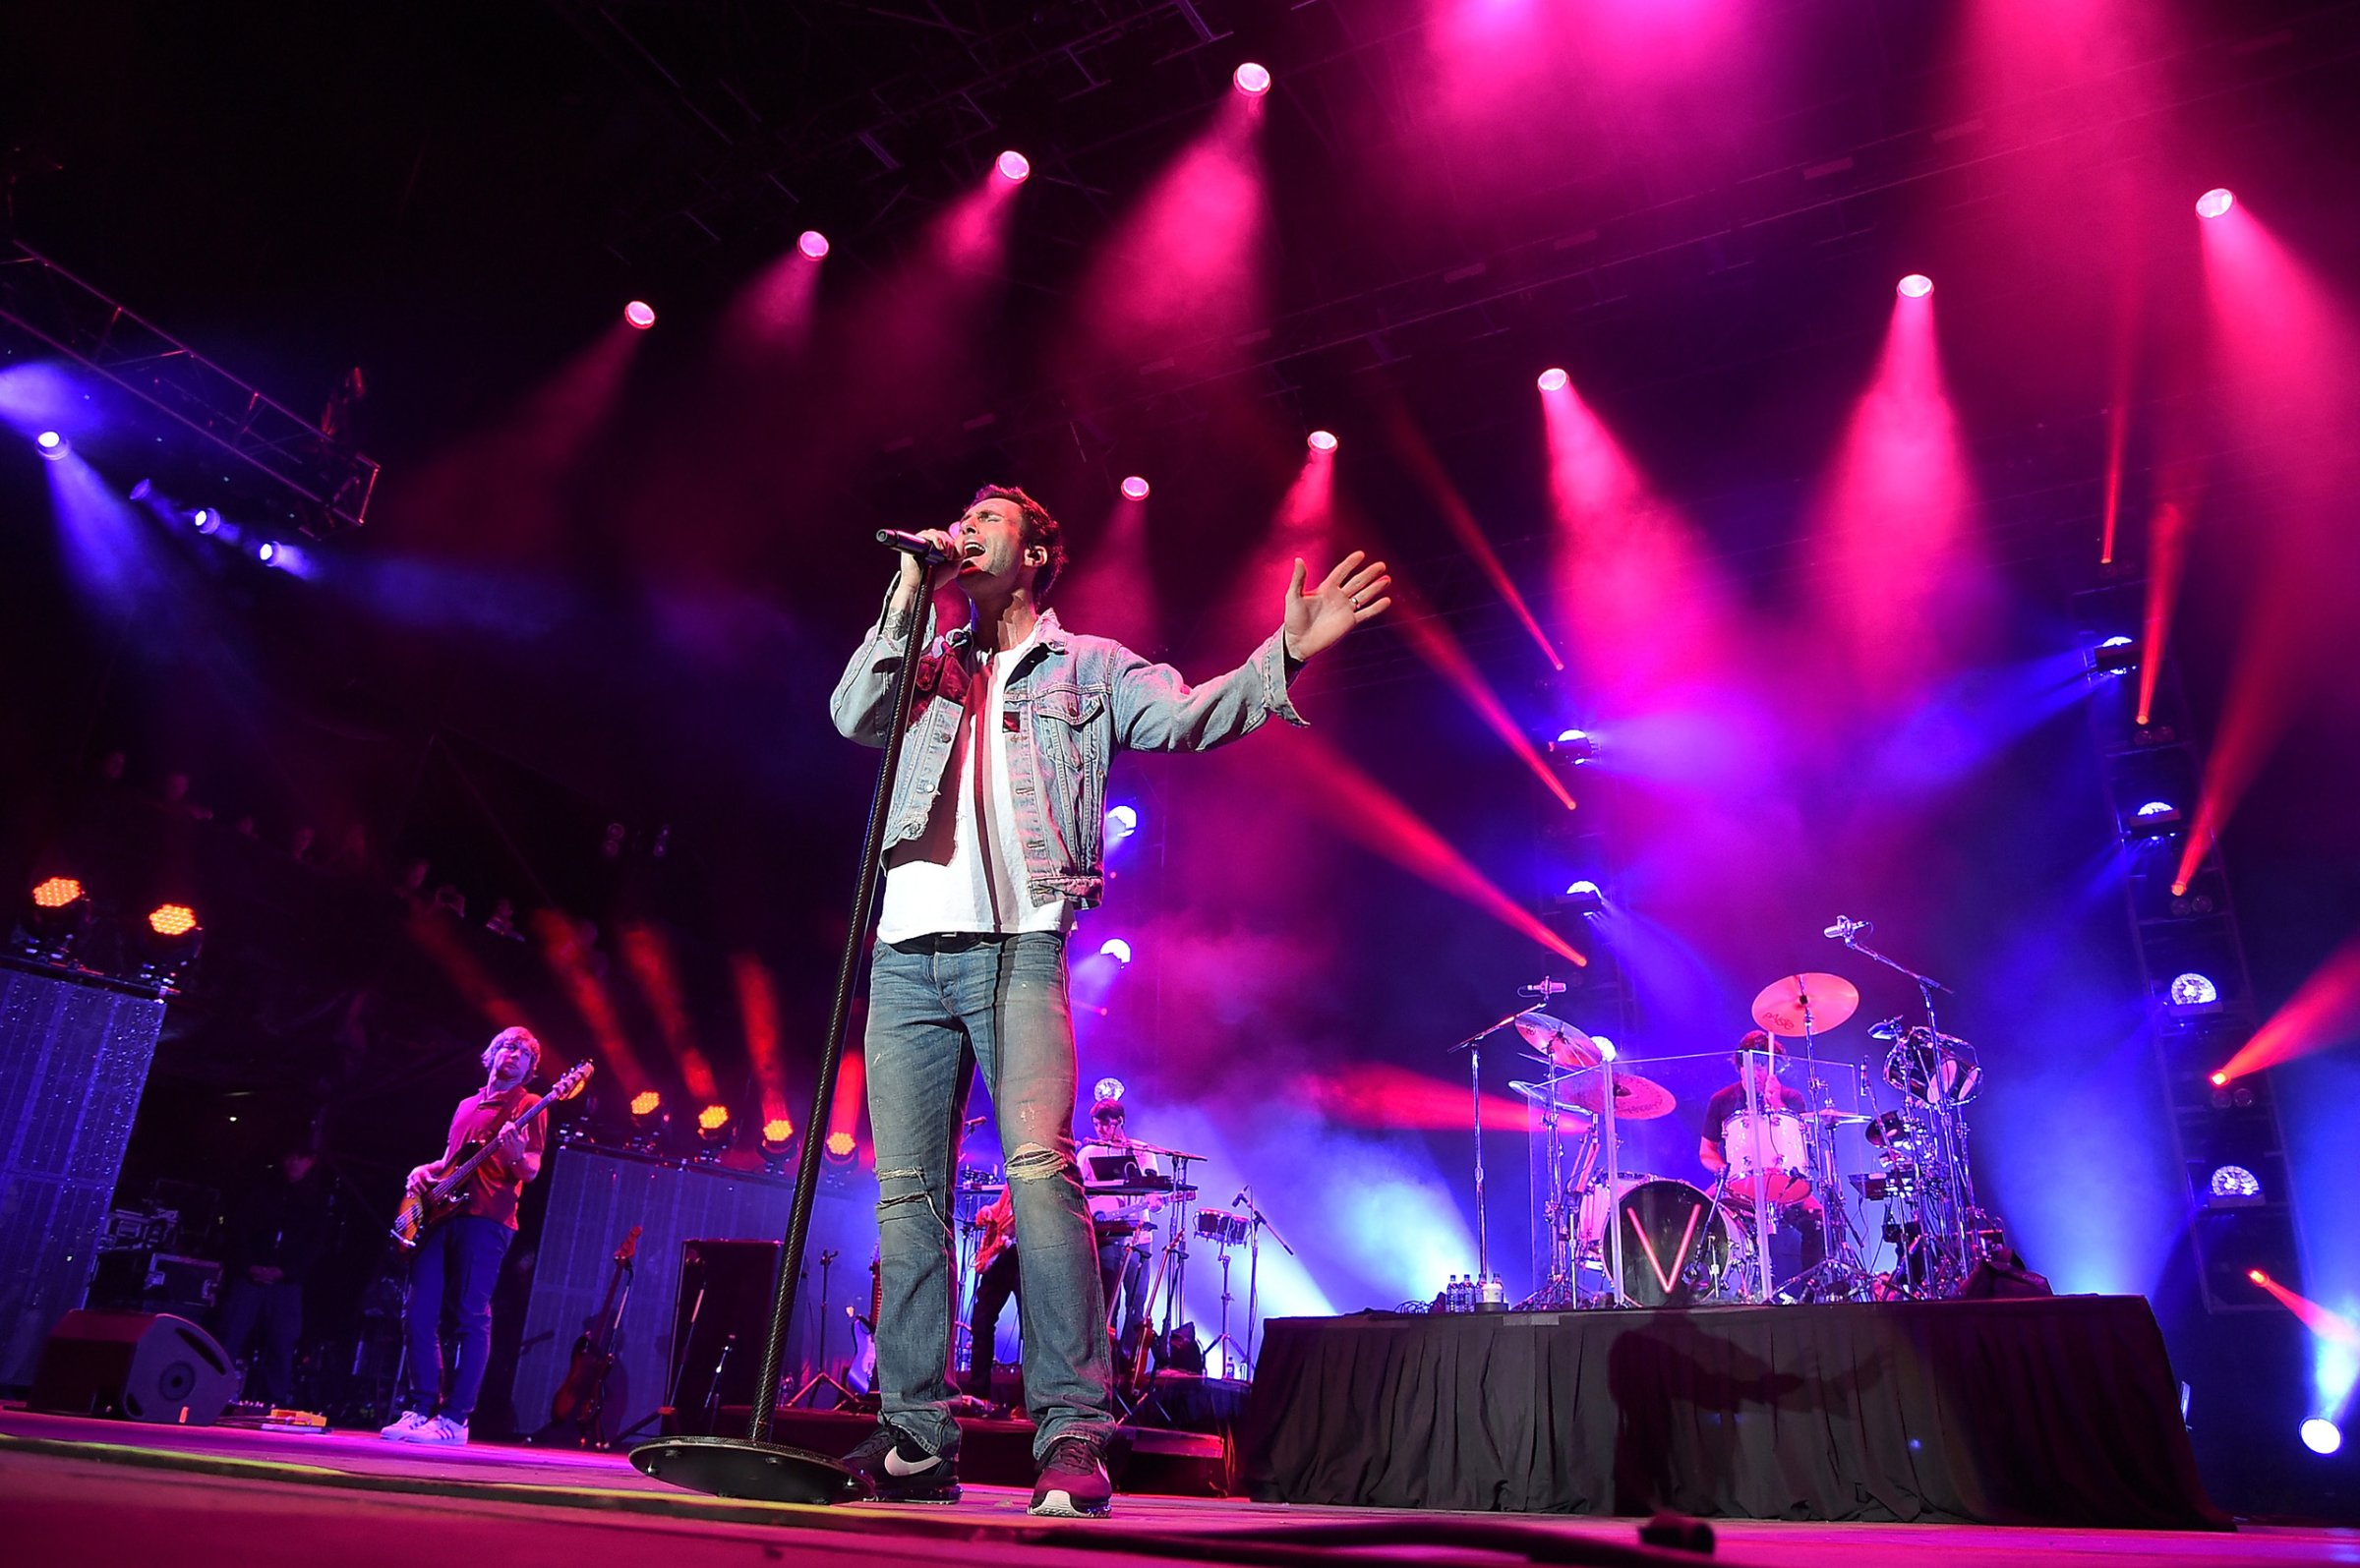 Maroon 5 performs on stage during at the NCAA March Madness Music Festival Day 3 in Houston, Texas on April 3, 2016.